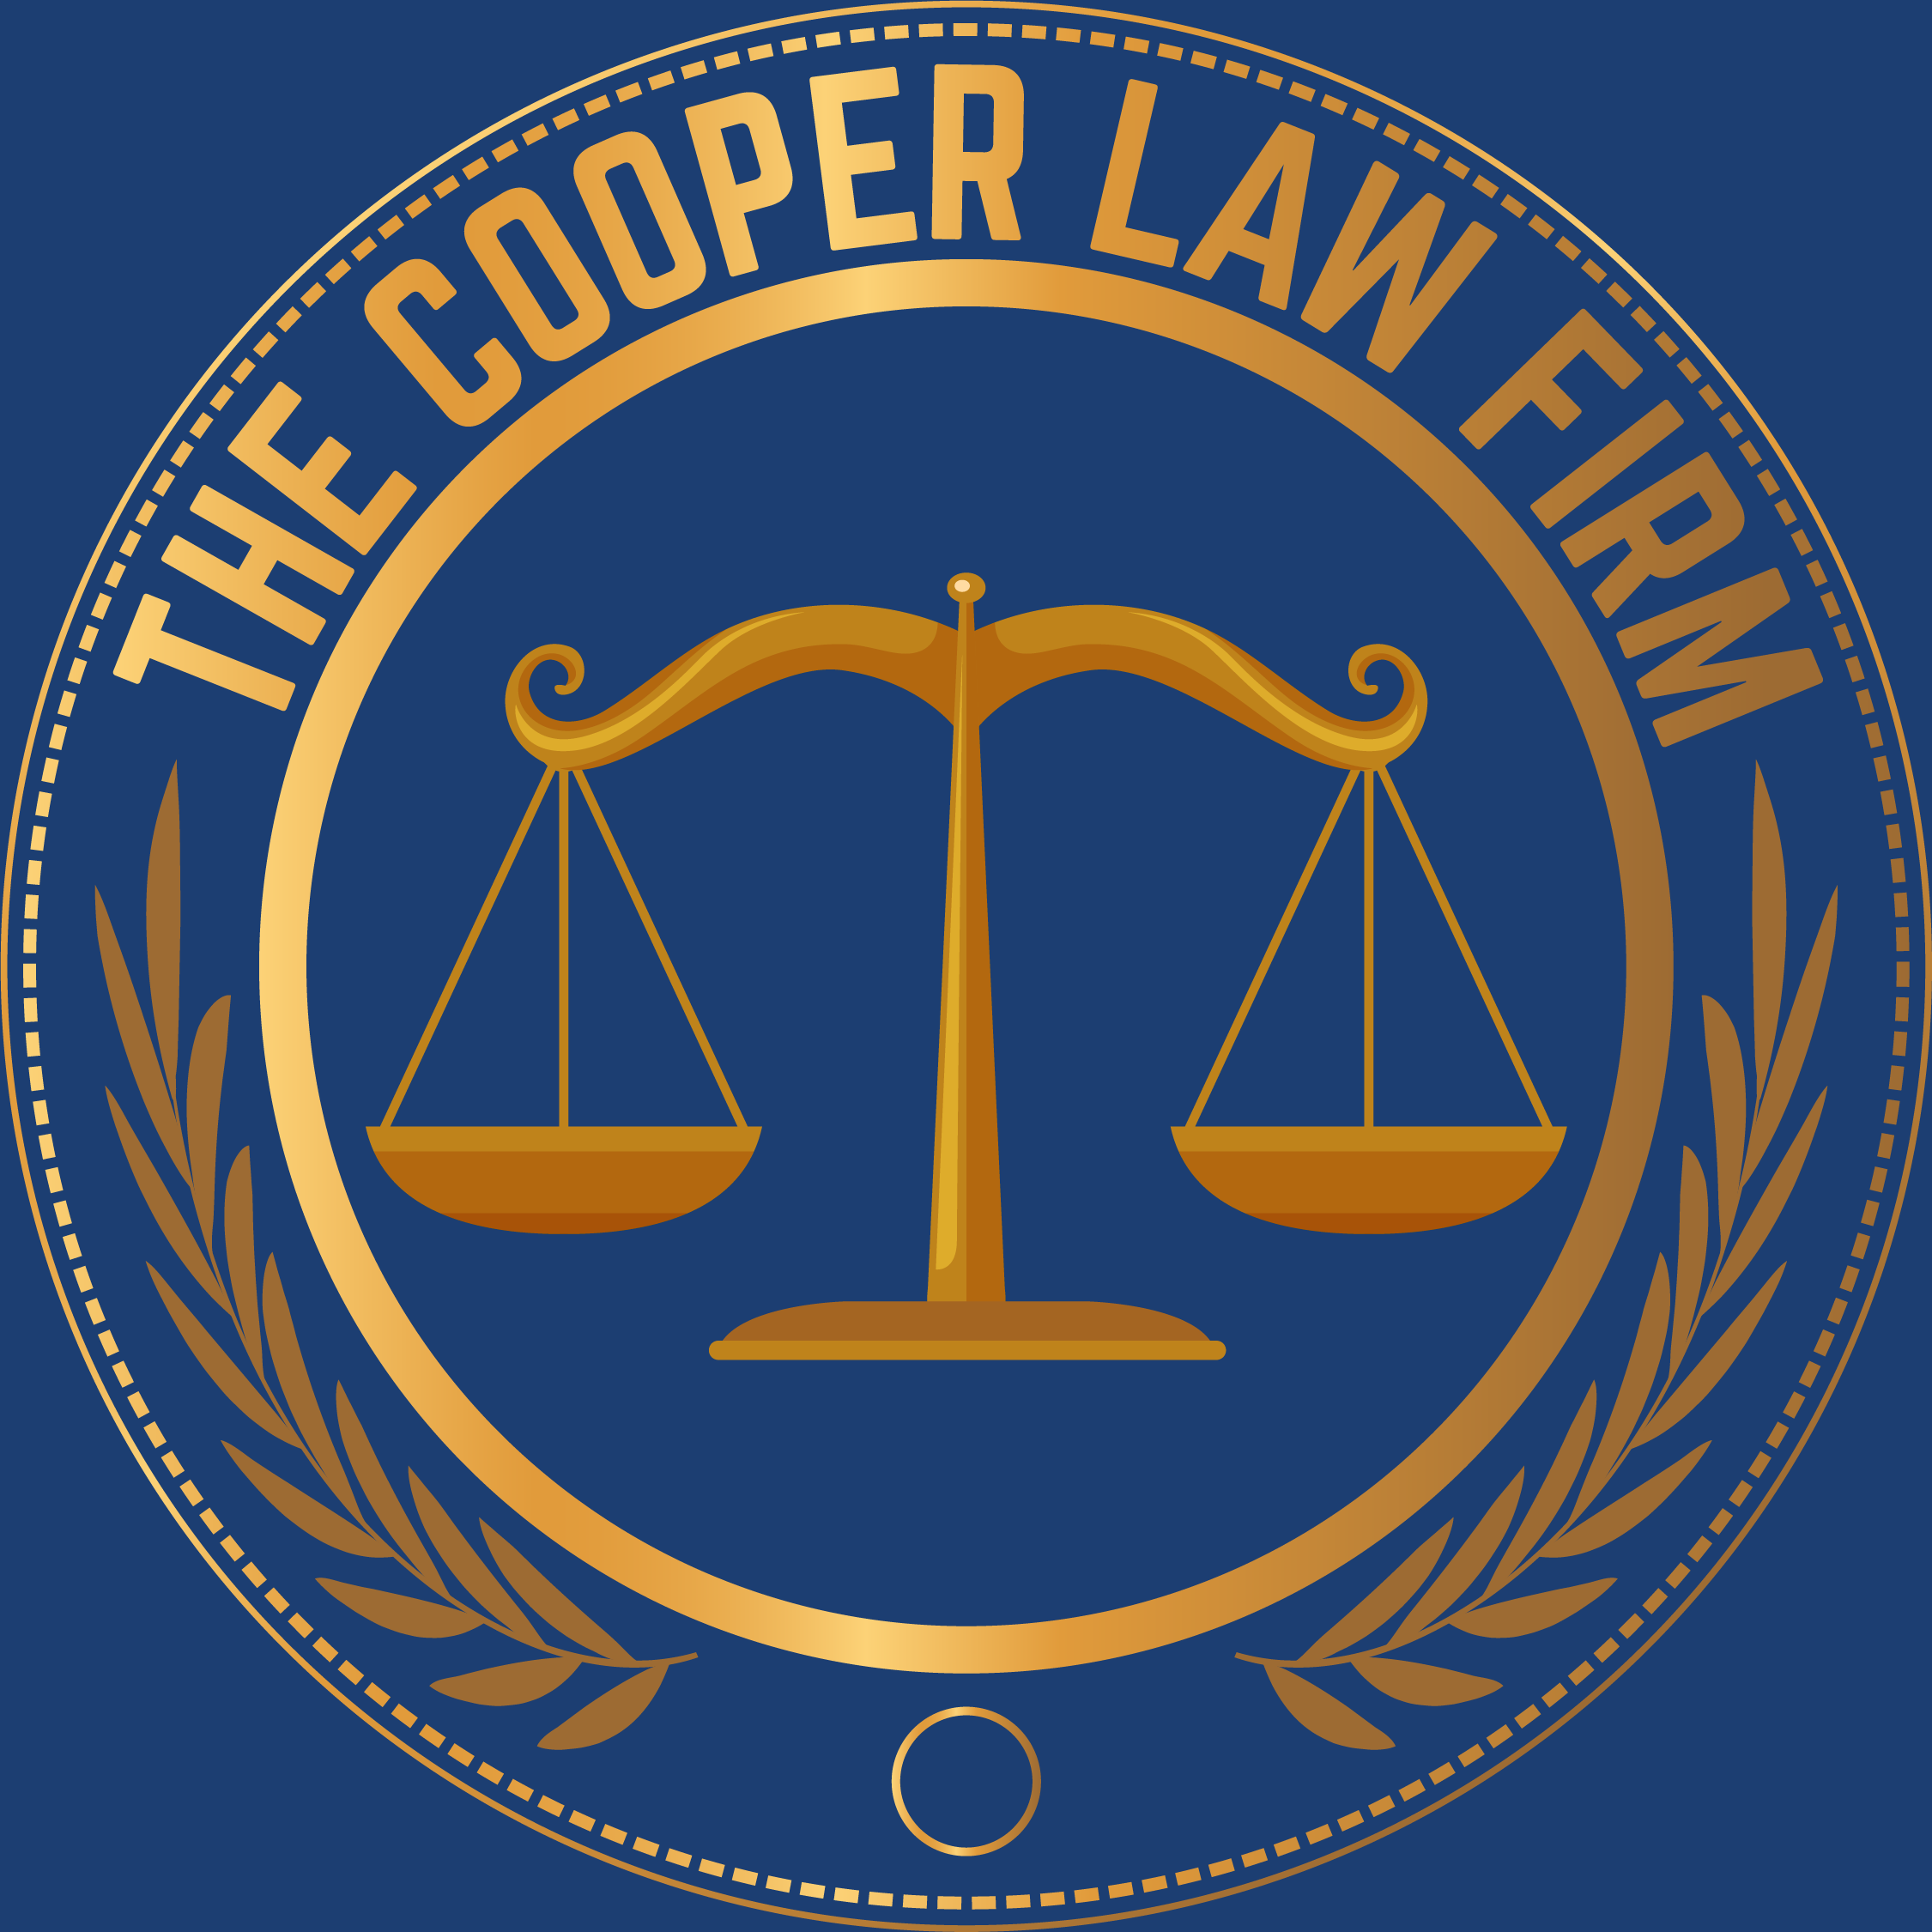 The Cooper law firm USA